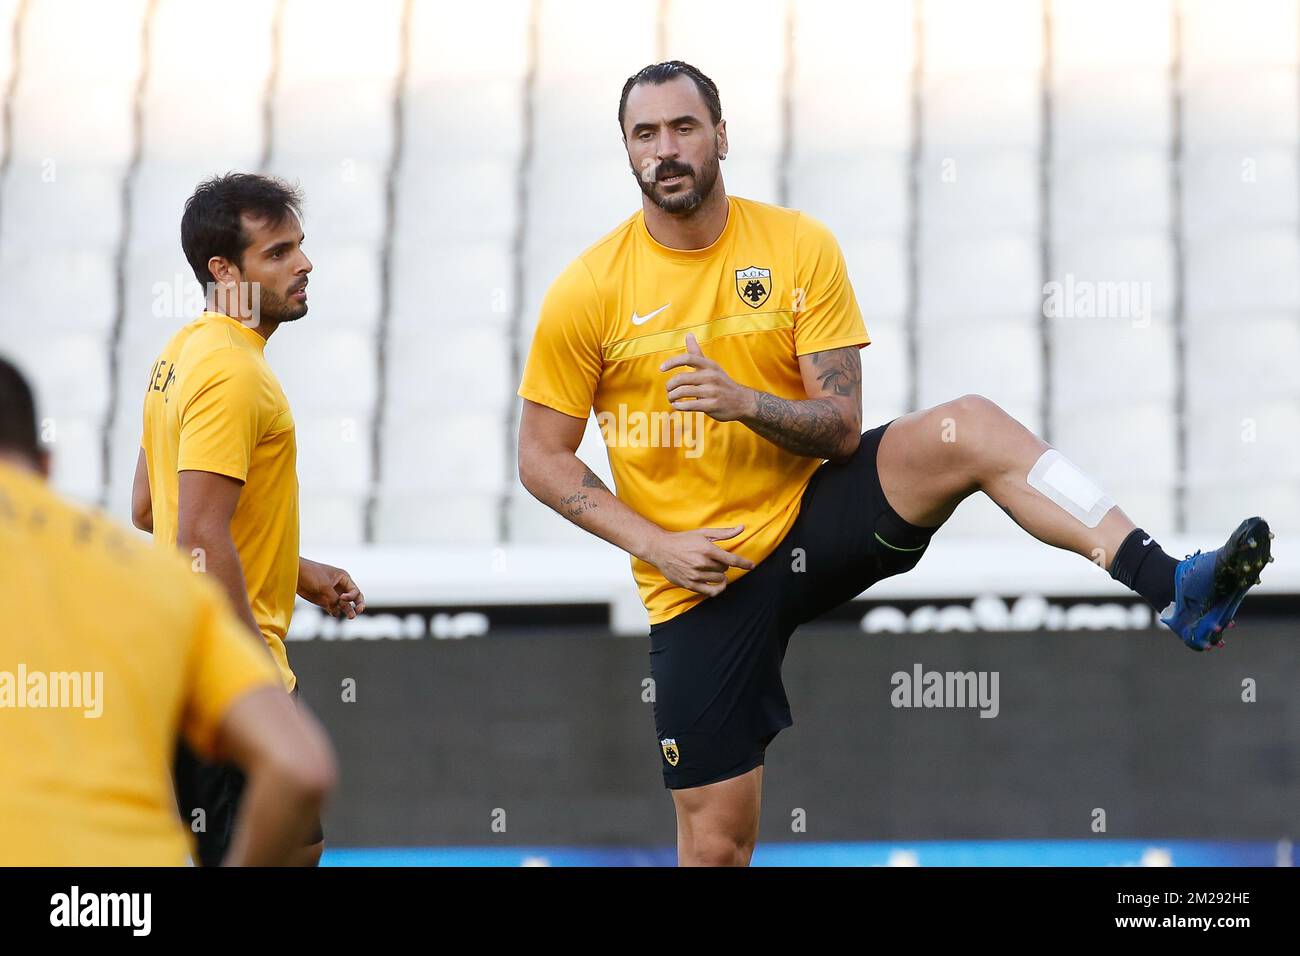 AEK's Hugo Almeida pictured during a training session of Greek soccer club AEK Athens F.C., Wednesday 16 August 2017 in Brugge. The team is preparing for tomorrow's game against Belgian team Club Brugge KSV, the first leg of the first playoff round for the UEFA Europa League competition. BELGA PHOTO BRUNO FAHY Stock Photo